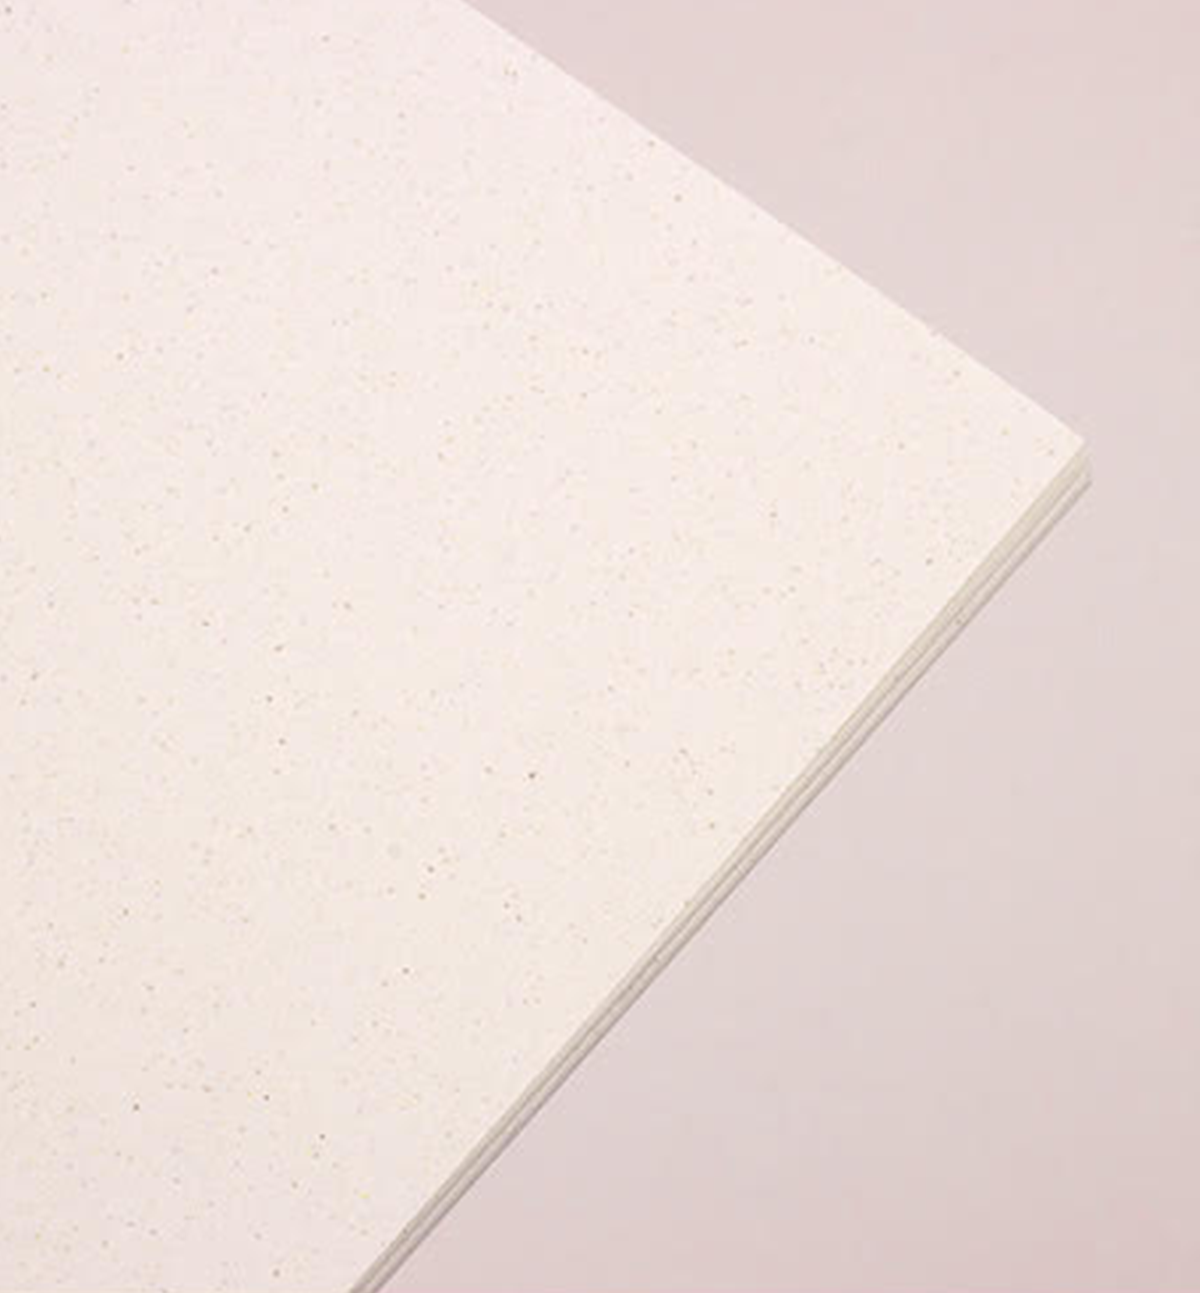 Archive Sand Paper Refill